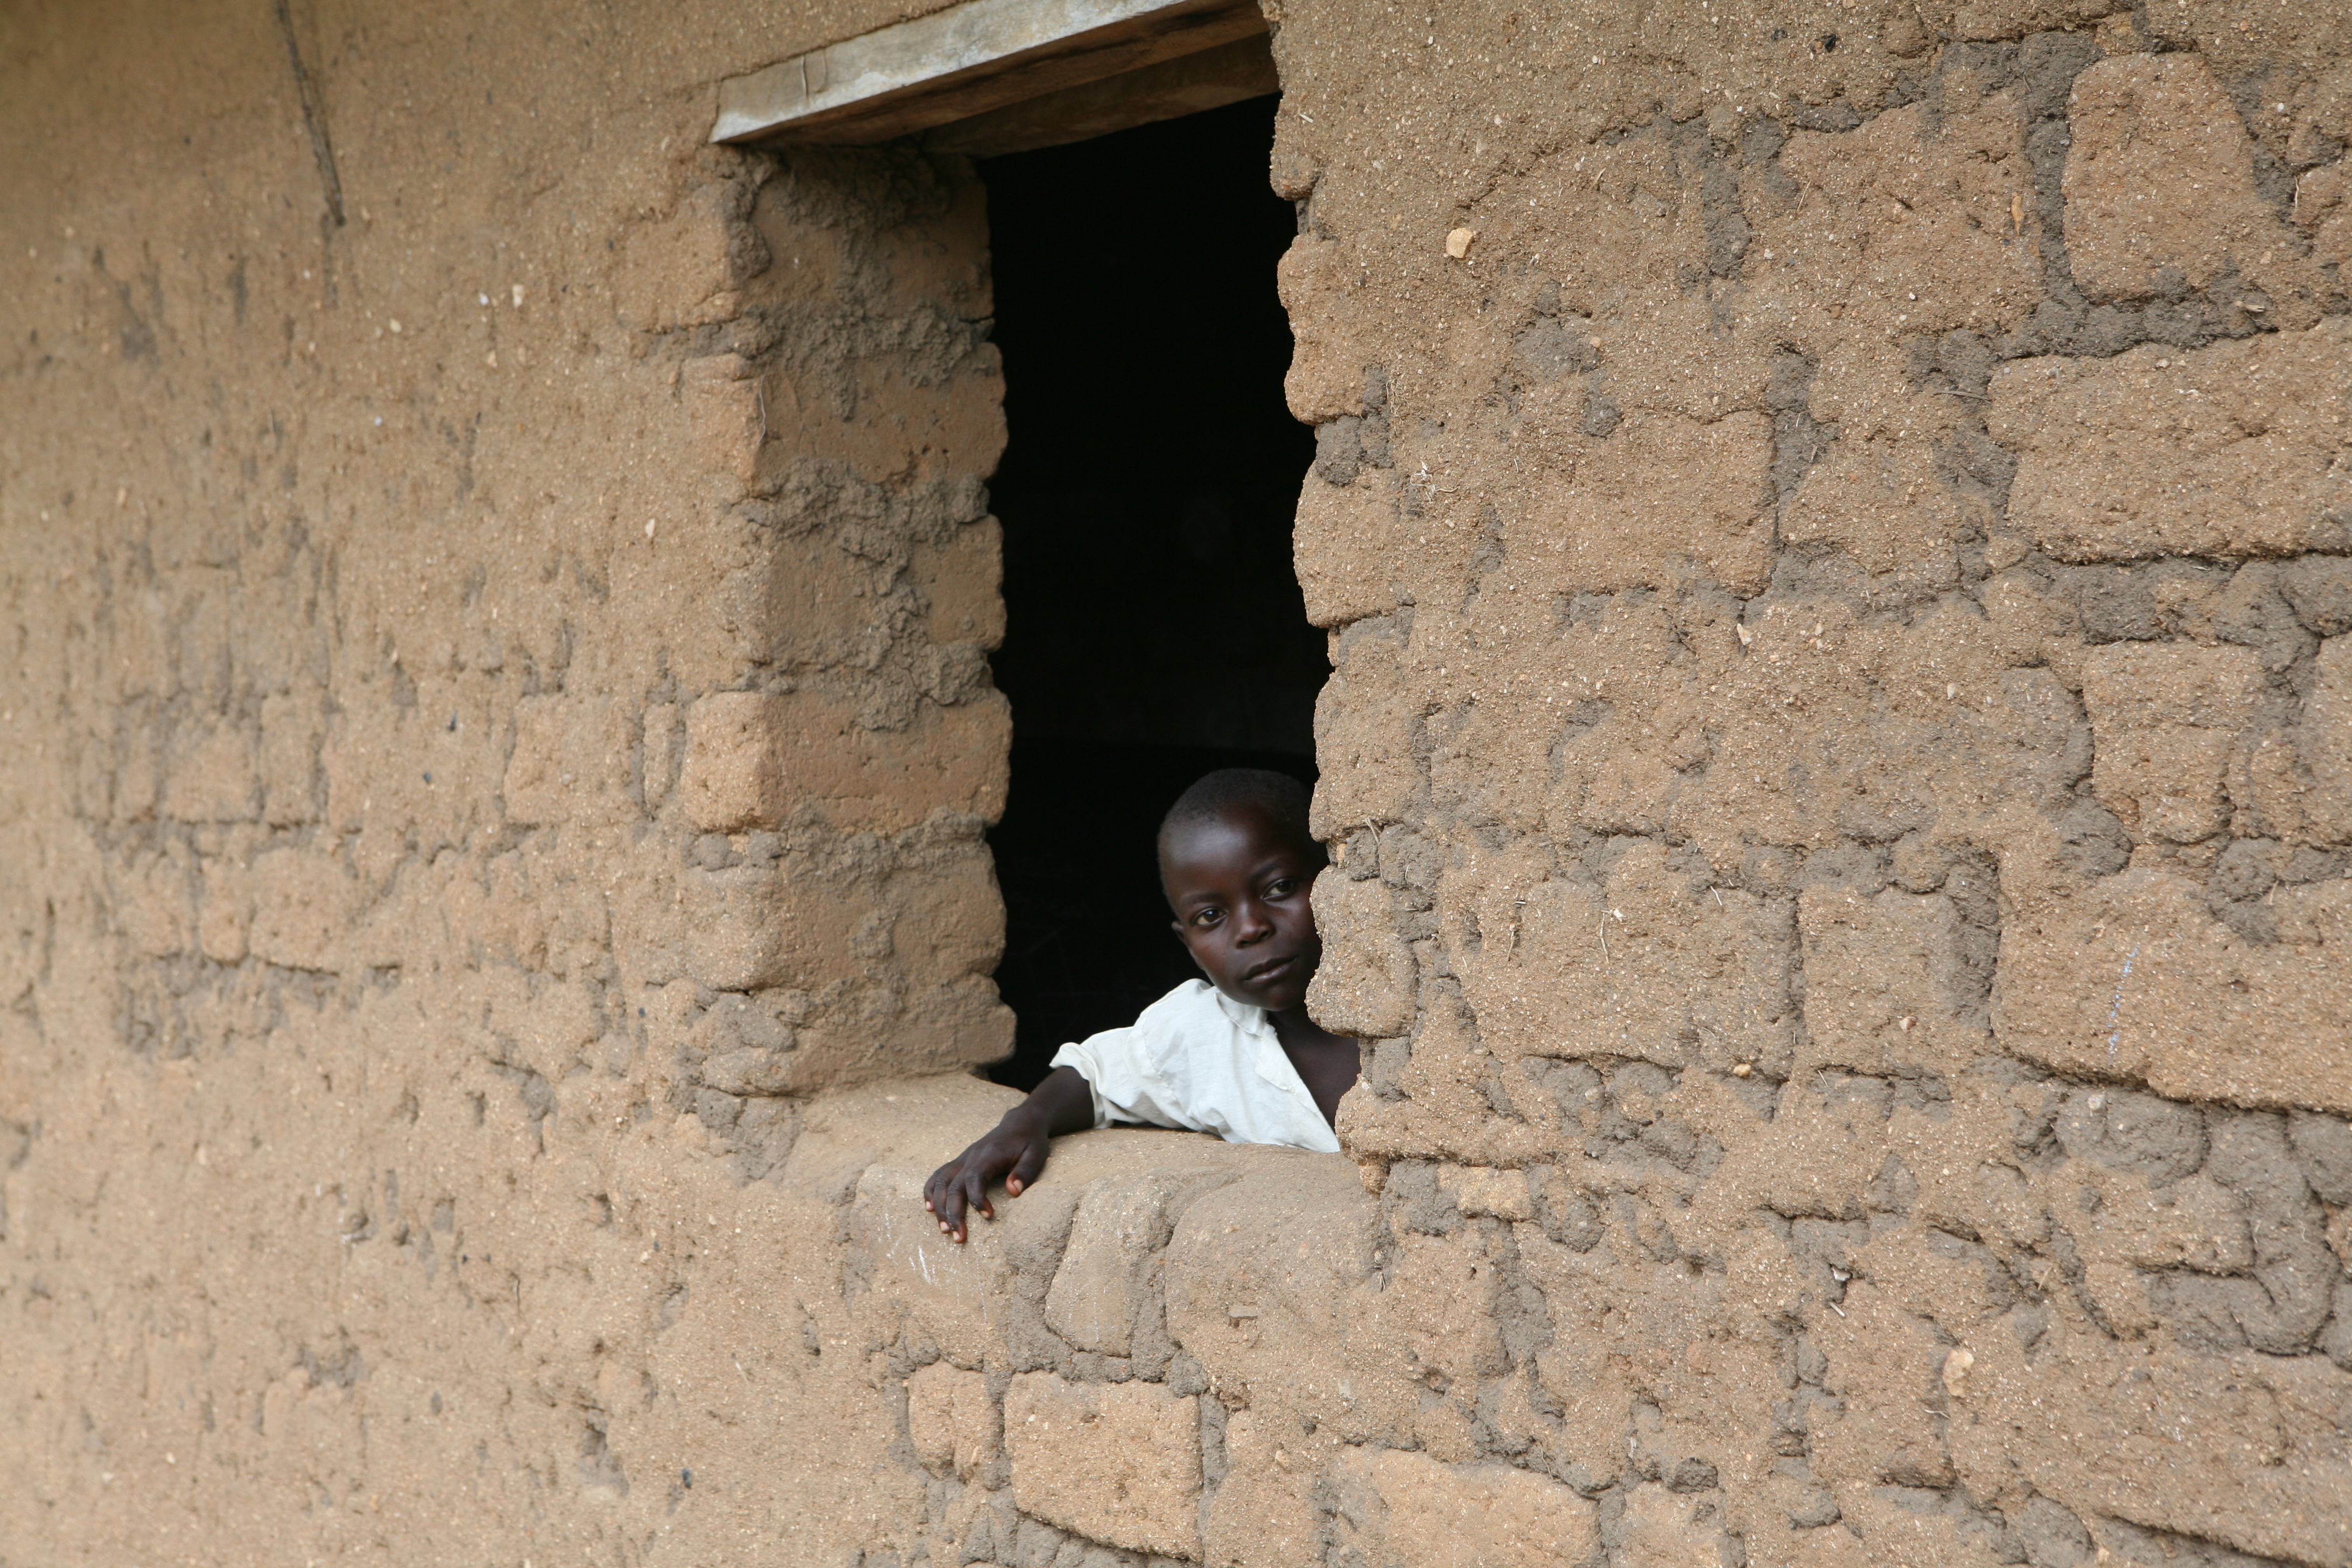 Photo: Zahra Moloo/IRIN There are few functioning state institutions for children in conflict with the law in the DRC